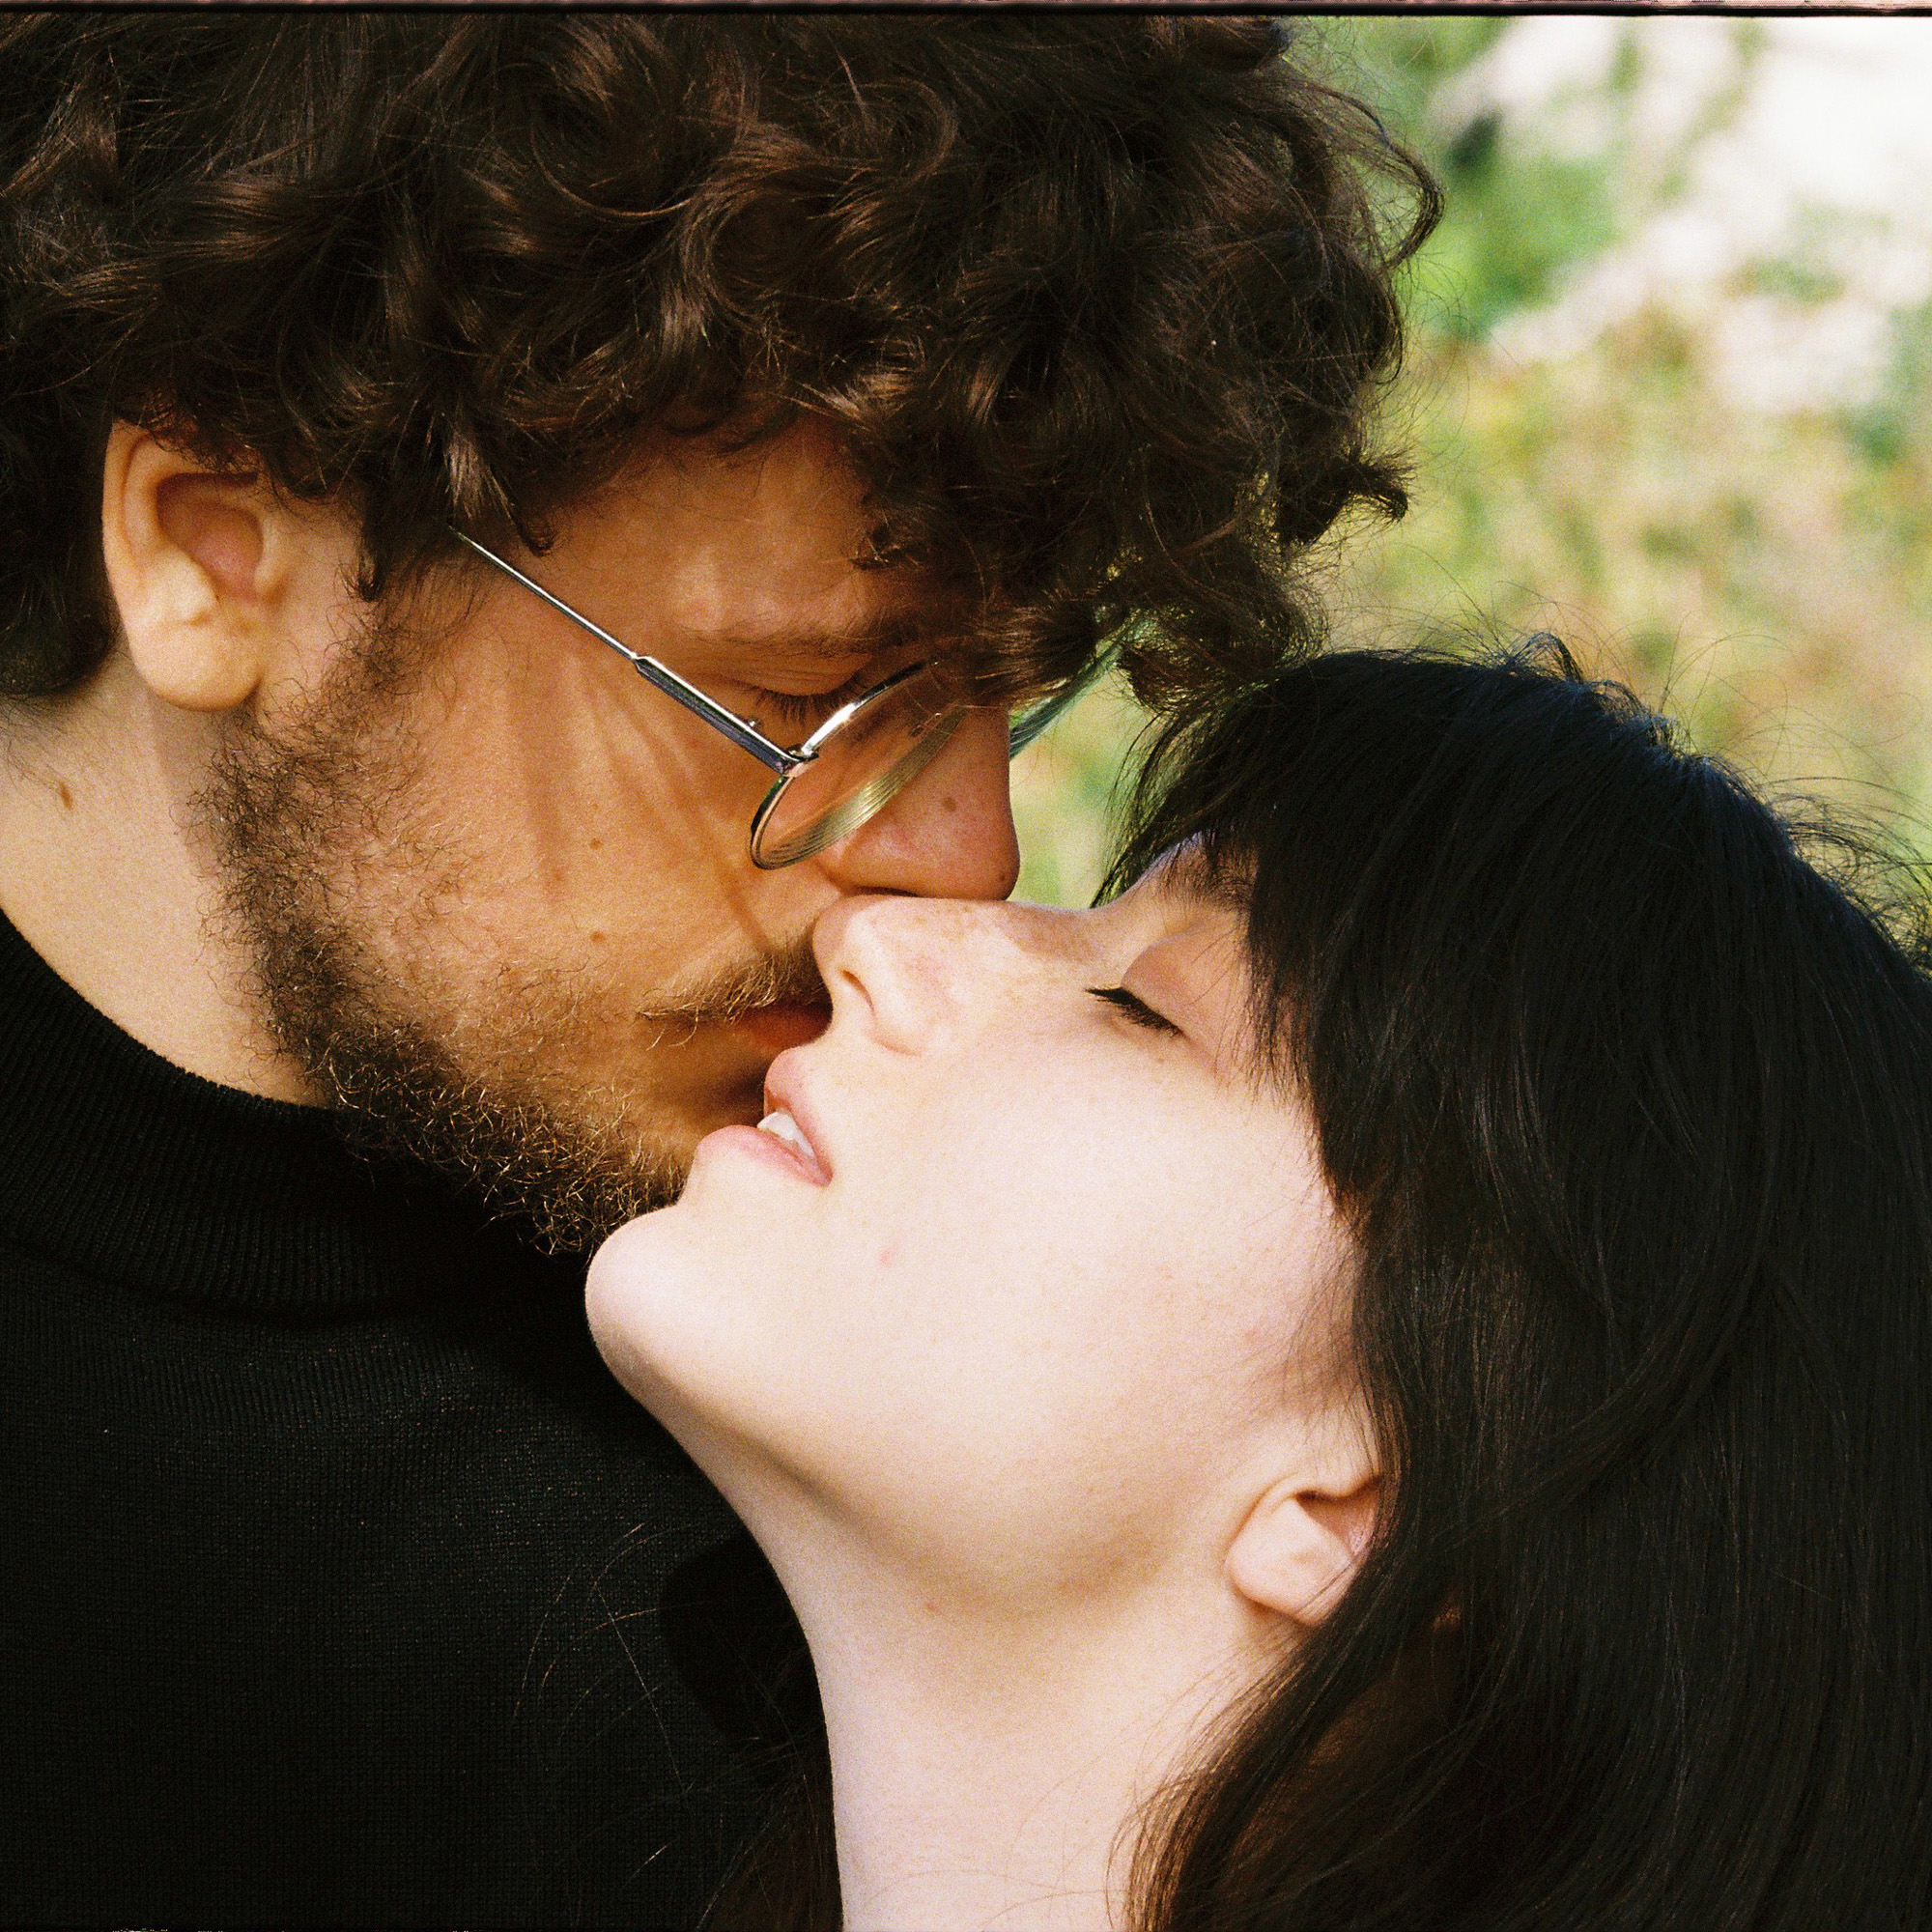 Kissing couple on film